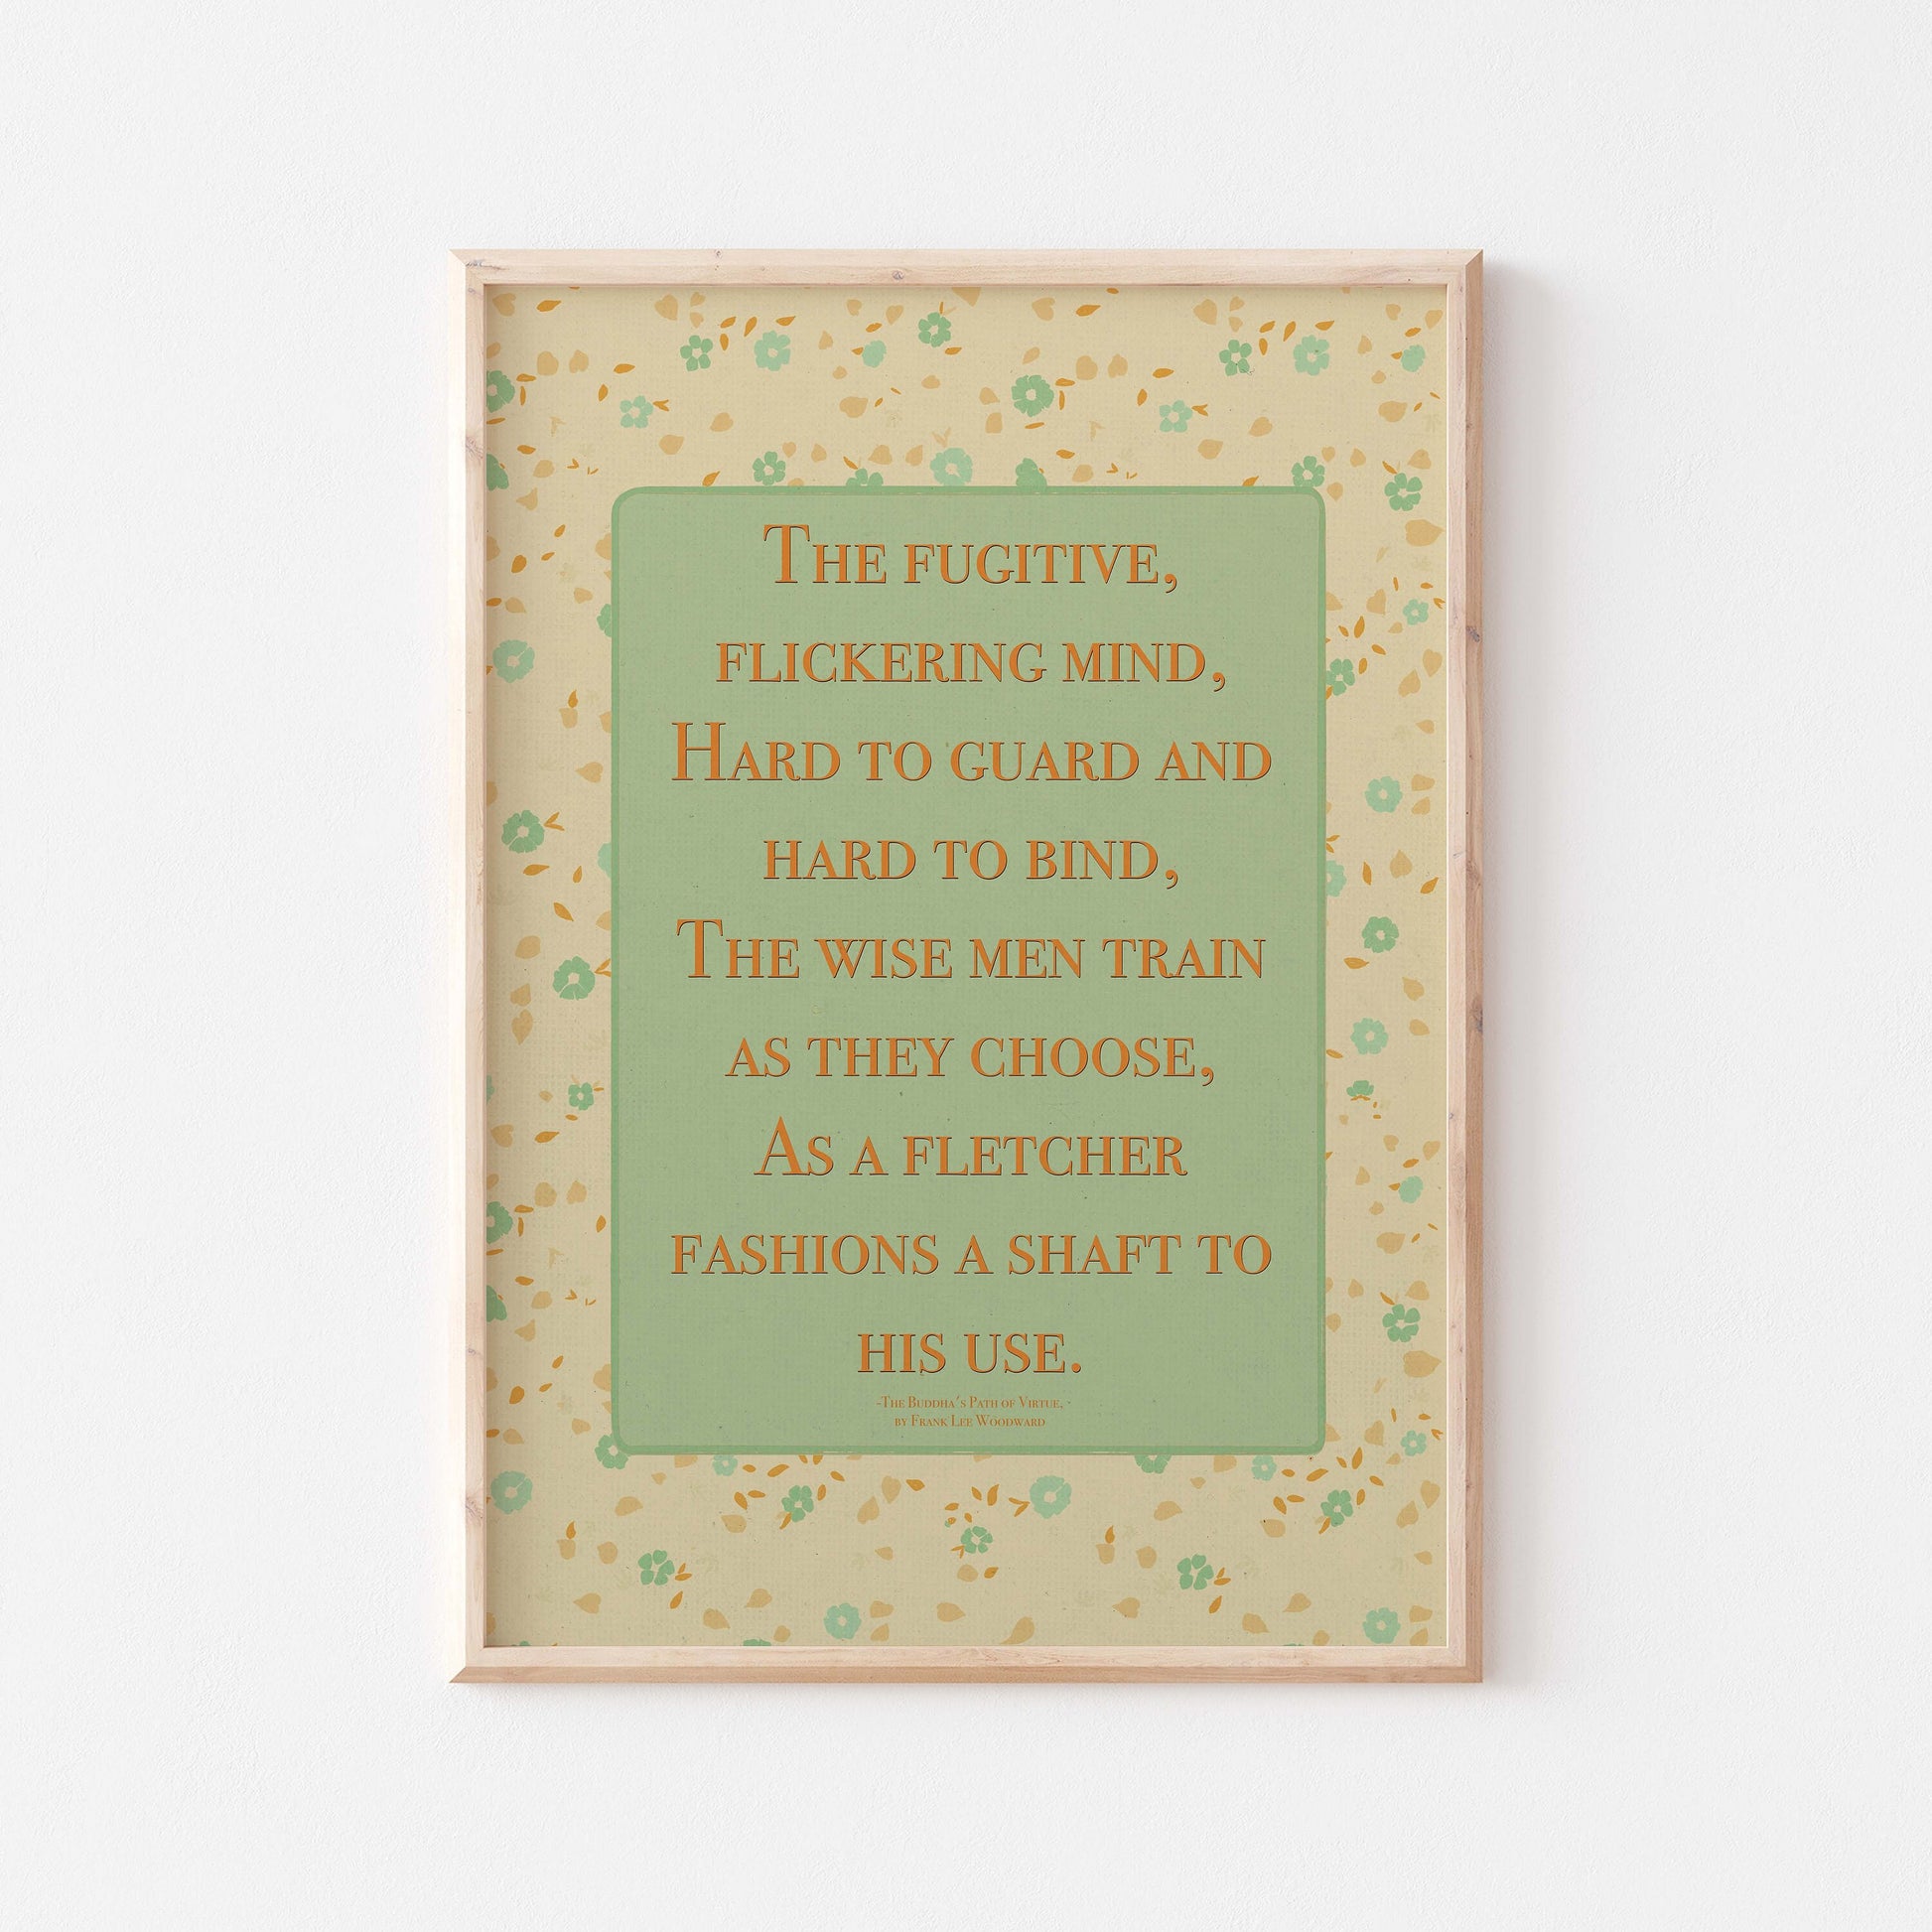 Dhammapada quote on mind poster in pastel colors with floral design in wood frame display